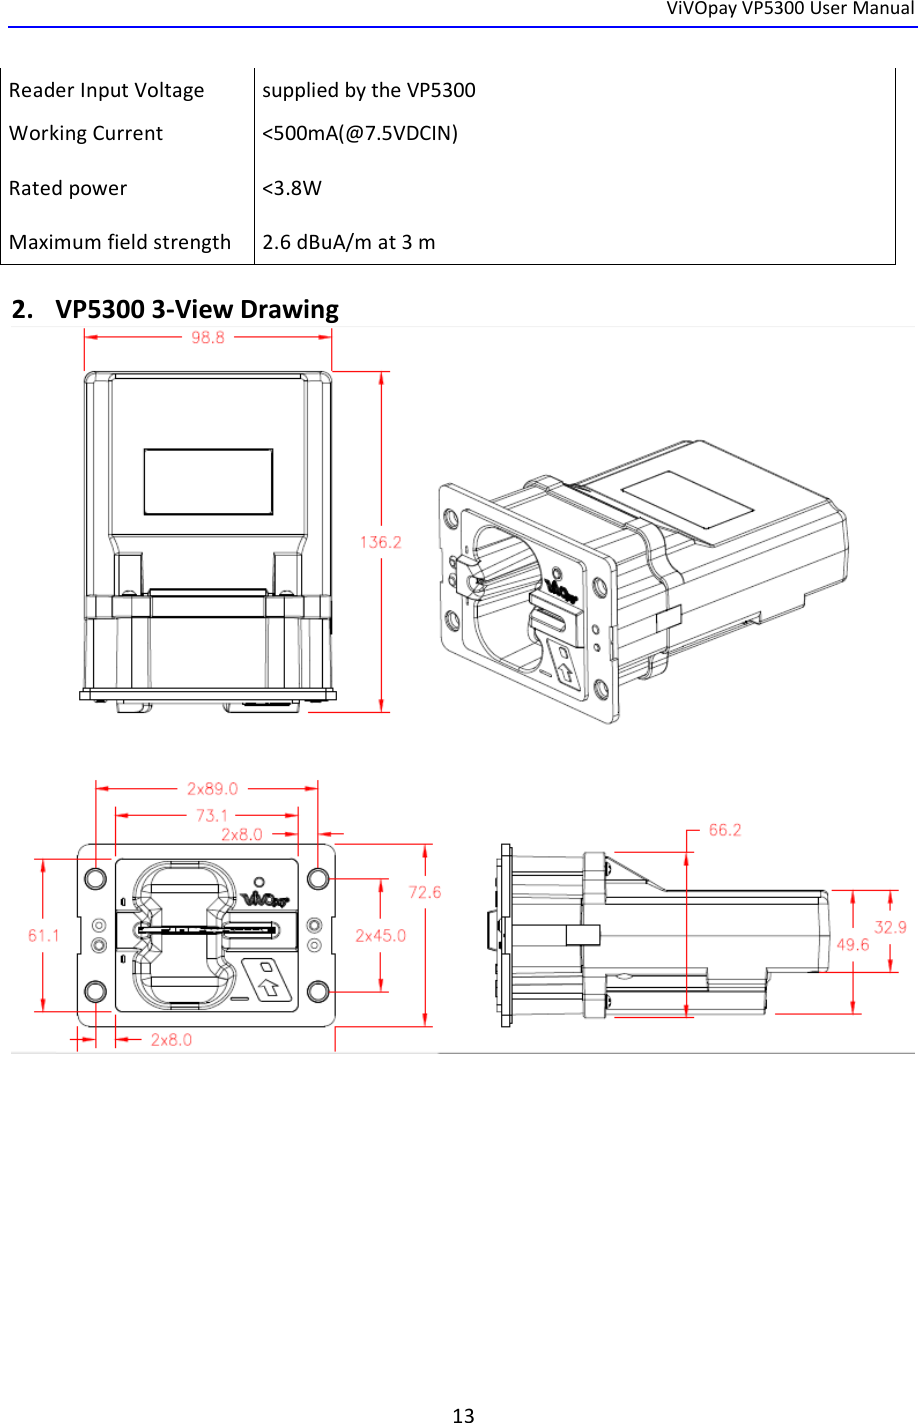  ViVOpay VP5300 User Manual   13  Reader Input Voltage  supplied by the VP5300 Working Current  Rated power          Maximum field strength     &lt;500mA(@7.5VDCIN)   &lt;3.8W  2.6 dBuA/m at 3 m  2. VP5300 3-View Drawing     